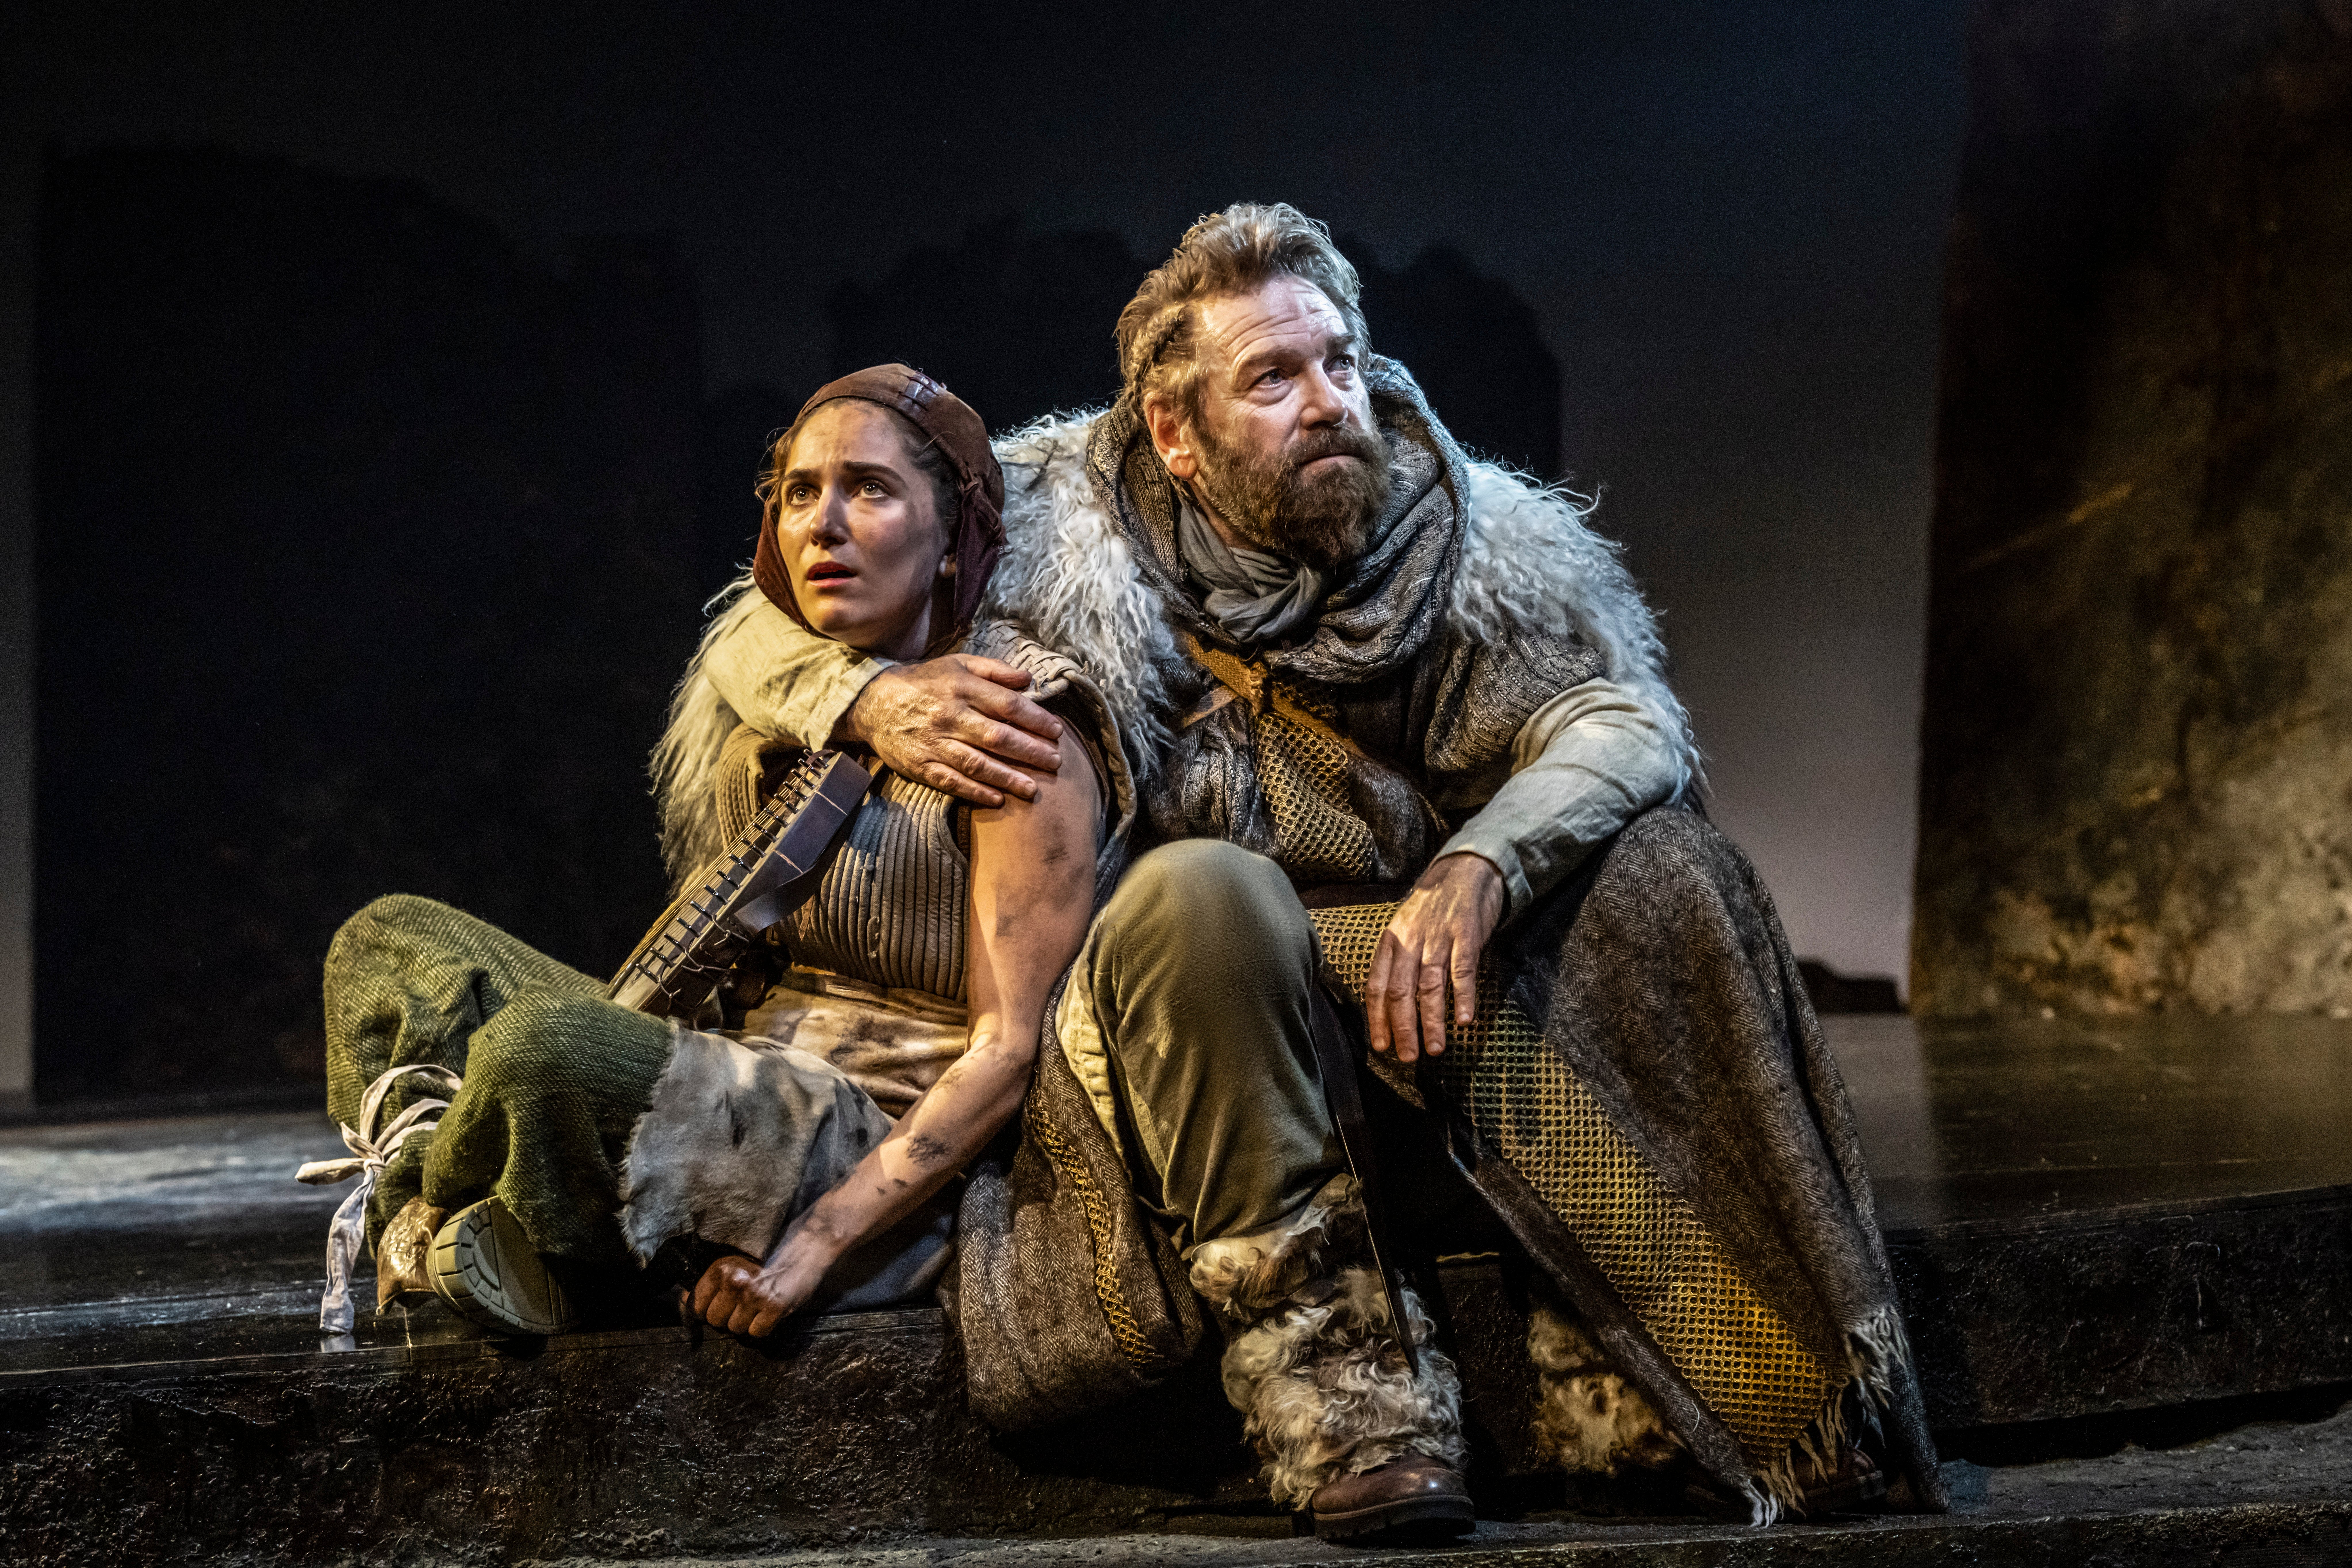 More sinned against than sinning: Jessica Revell and Kenneth Branagh in ‘King Lear' at Wyndham’s Theatre